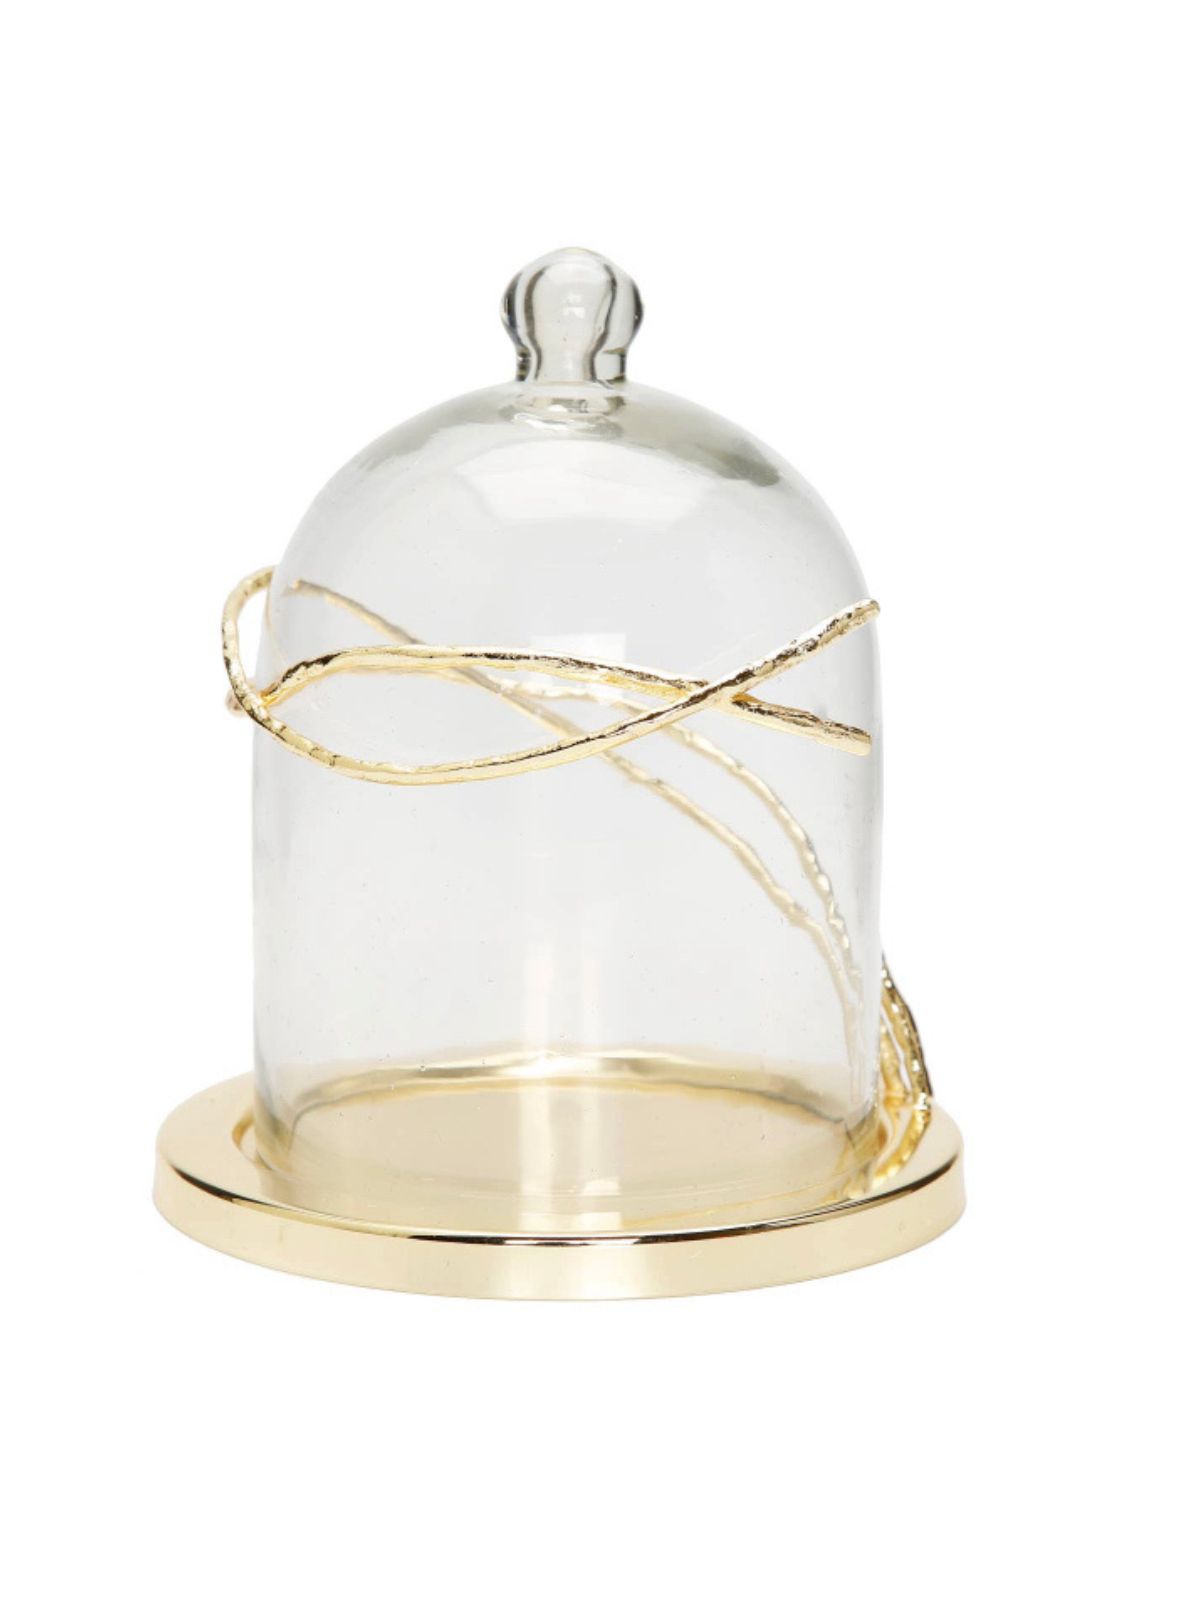 This stunning Glass Dome Candle Holder has an amazing Gold Twig Design Sold by KYA Home Decor.